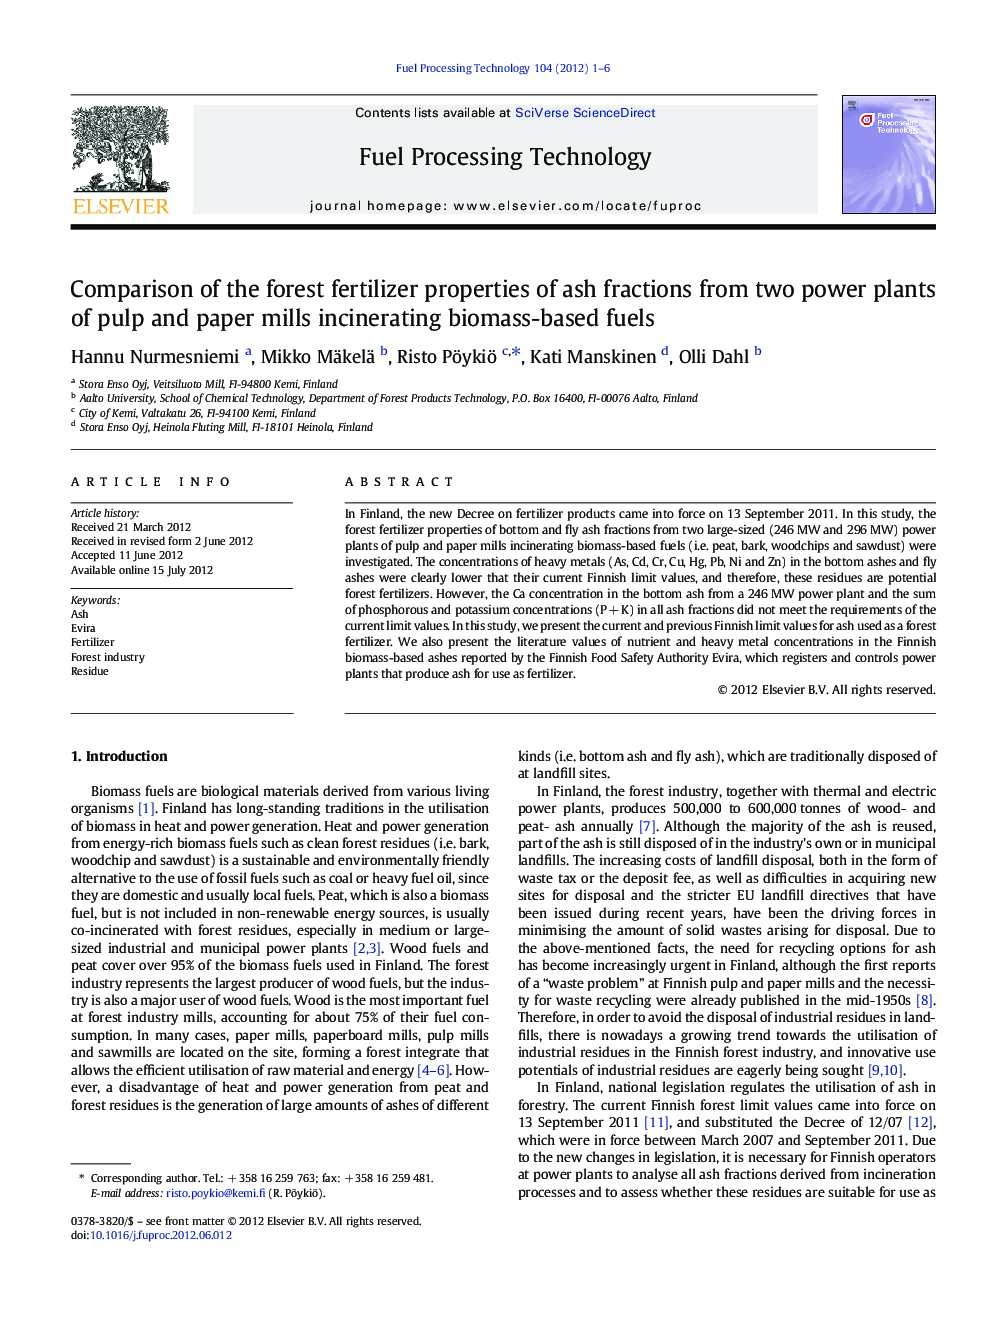 Comparison of the forest fertilizer properties of ash fractions from two power plants of pulp and paper mills incinerating biomass-based fuels